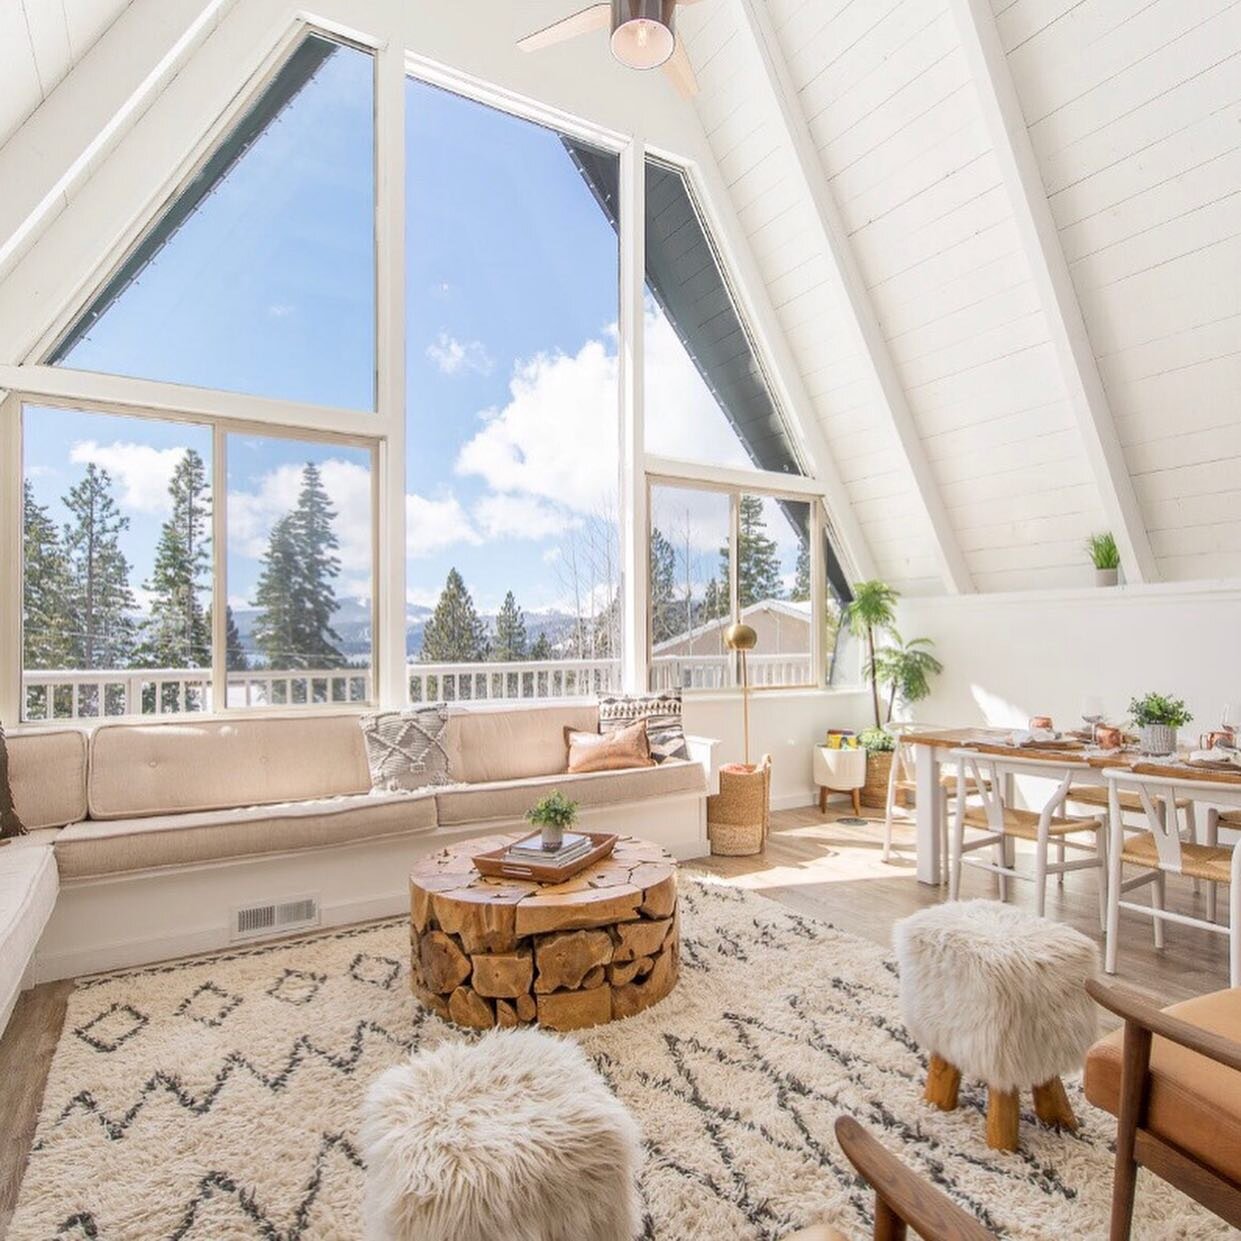 The best part of an Aframe is hands down the glorious oversized windows and giant vaulted ceilings! A close second is the floor to ceiling wood paneling. Within our cabin community here on IG, there is a friendly debate of &ldquo;to paint or not to p